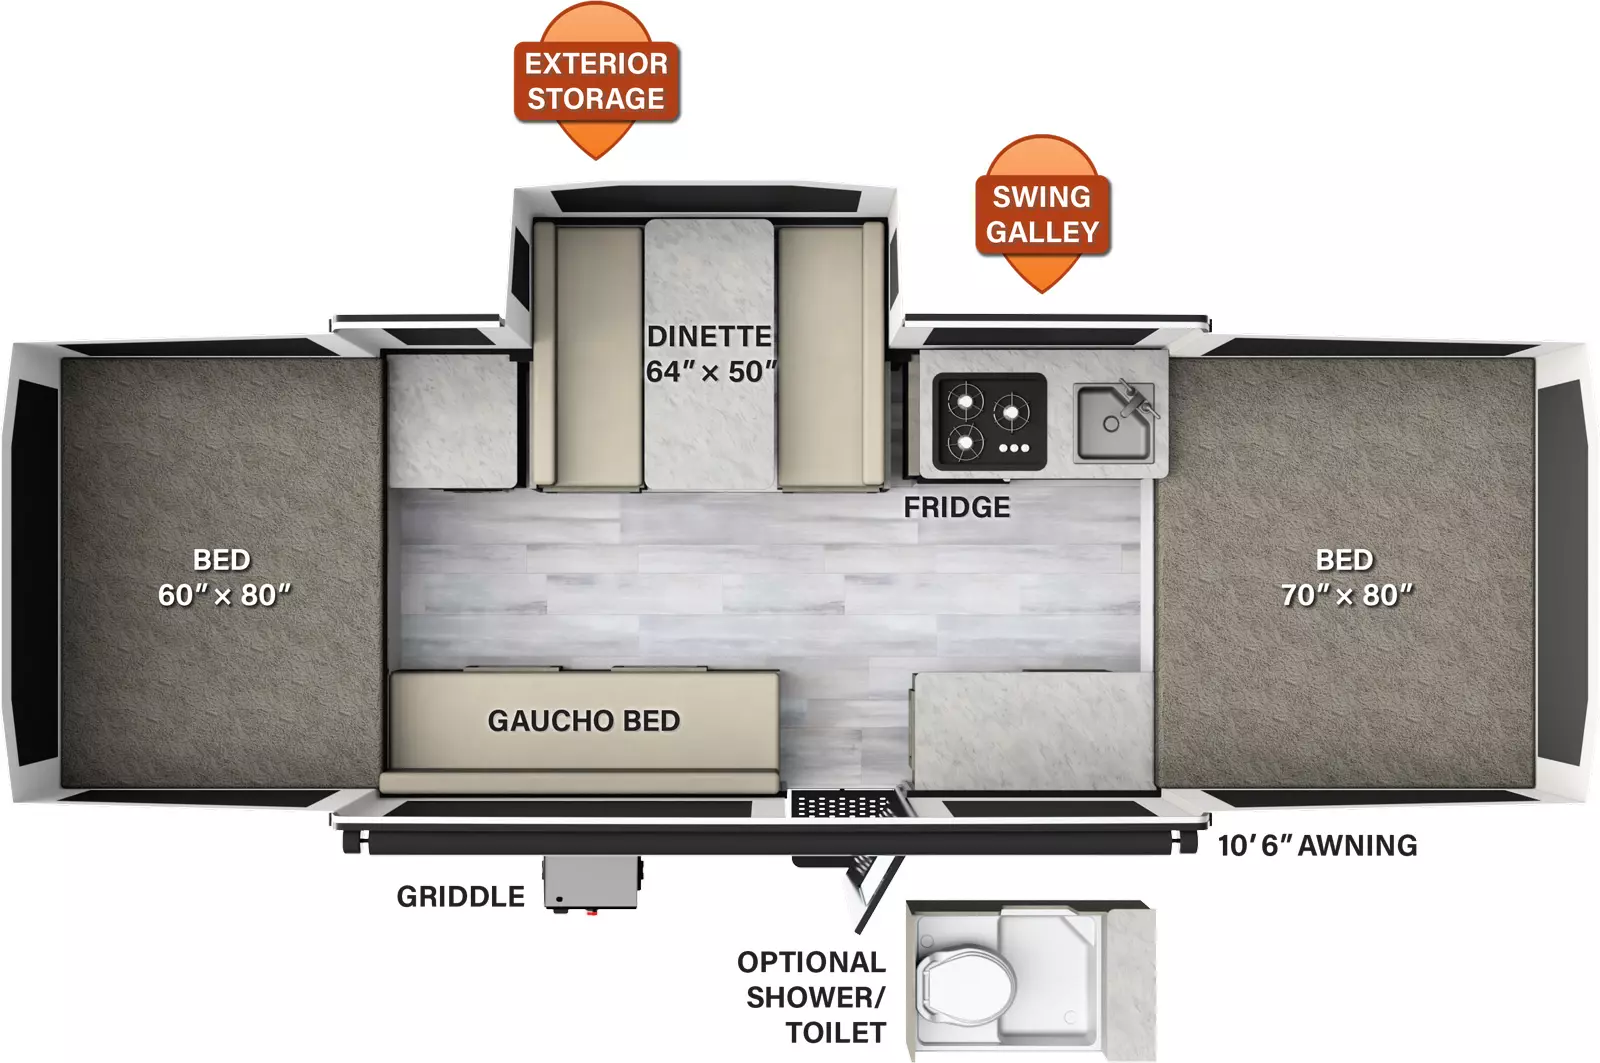 The 2318G has one slide out on the off-door side and one entry door. Exterior features include a 10 foot 6 inch awning, griddle, and exterior storage. Interior layout from front to back: front tent bed; off-door side swing galley with refrigerator, cooktop and sink, dinette slideout, and cabinet; door side cabinet and gaucho bed; rear tent bed. Optional shower/toilet available.